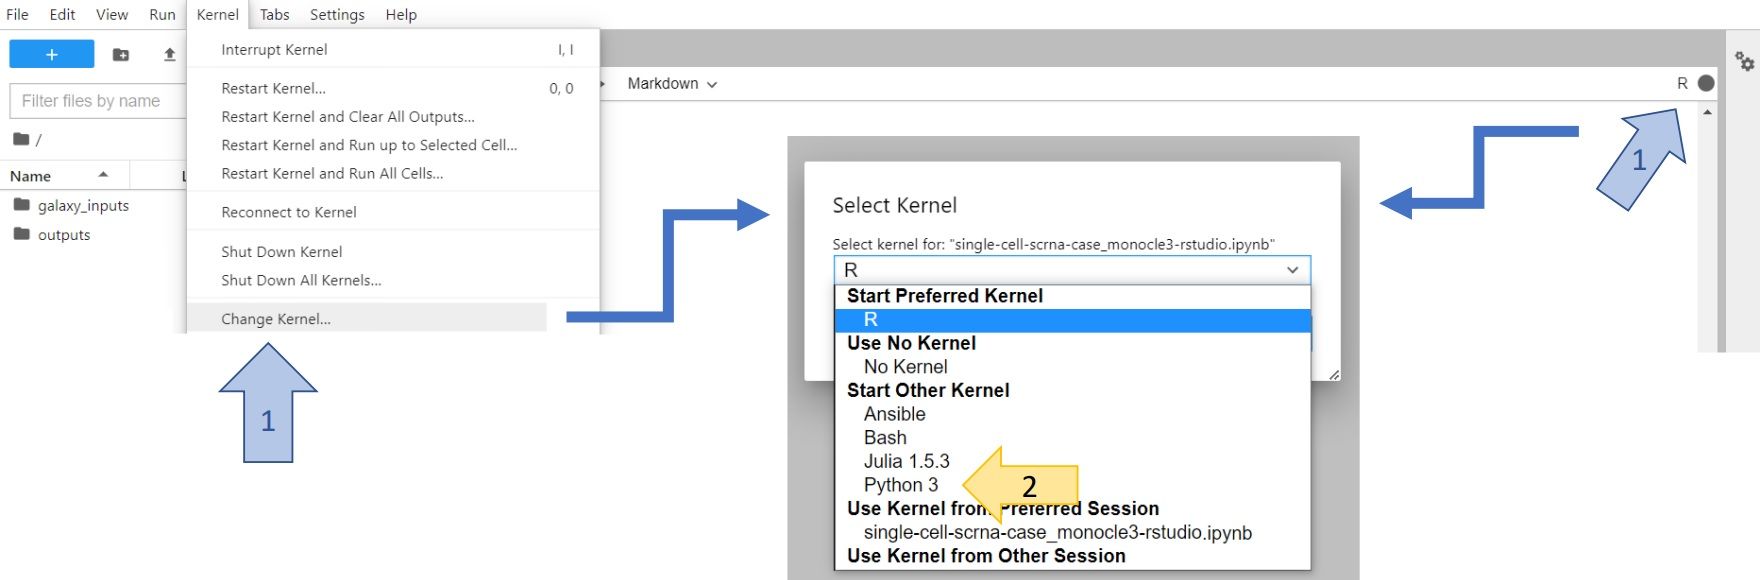 Figure showing the JupyterLab interface with an arrow pointing to the left corner, showing the option `Kernel` -> `Change Kernel...` and another arrow pointing to the right corner, showing the icon of the current kernel. The pop-up window asks which kernel should be chosen instead.